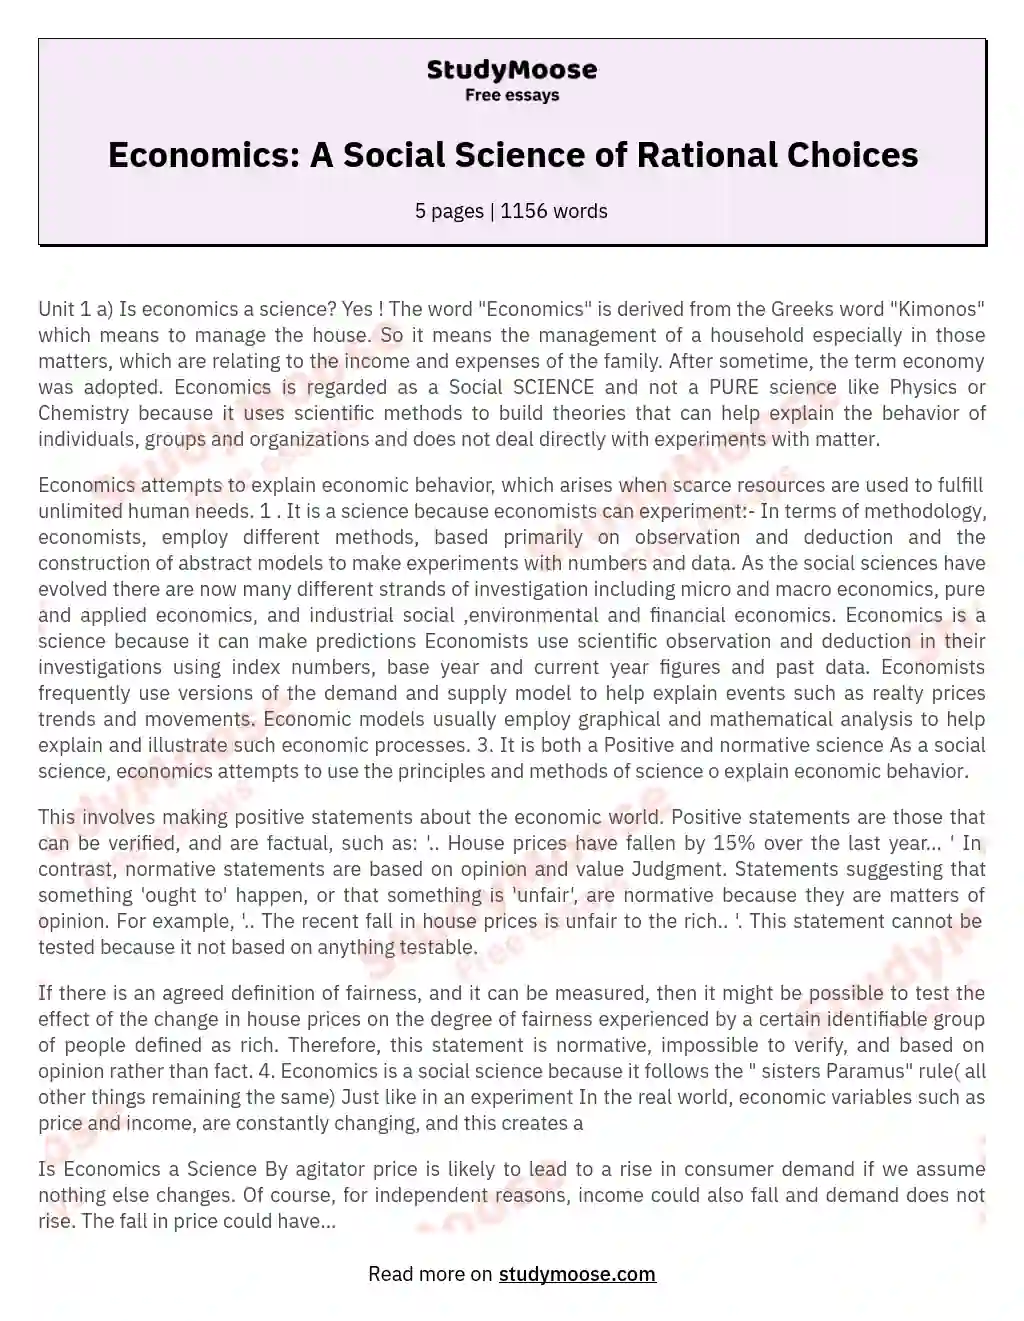 Economics: A Social Science of Rational Choices essay